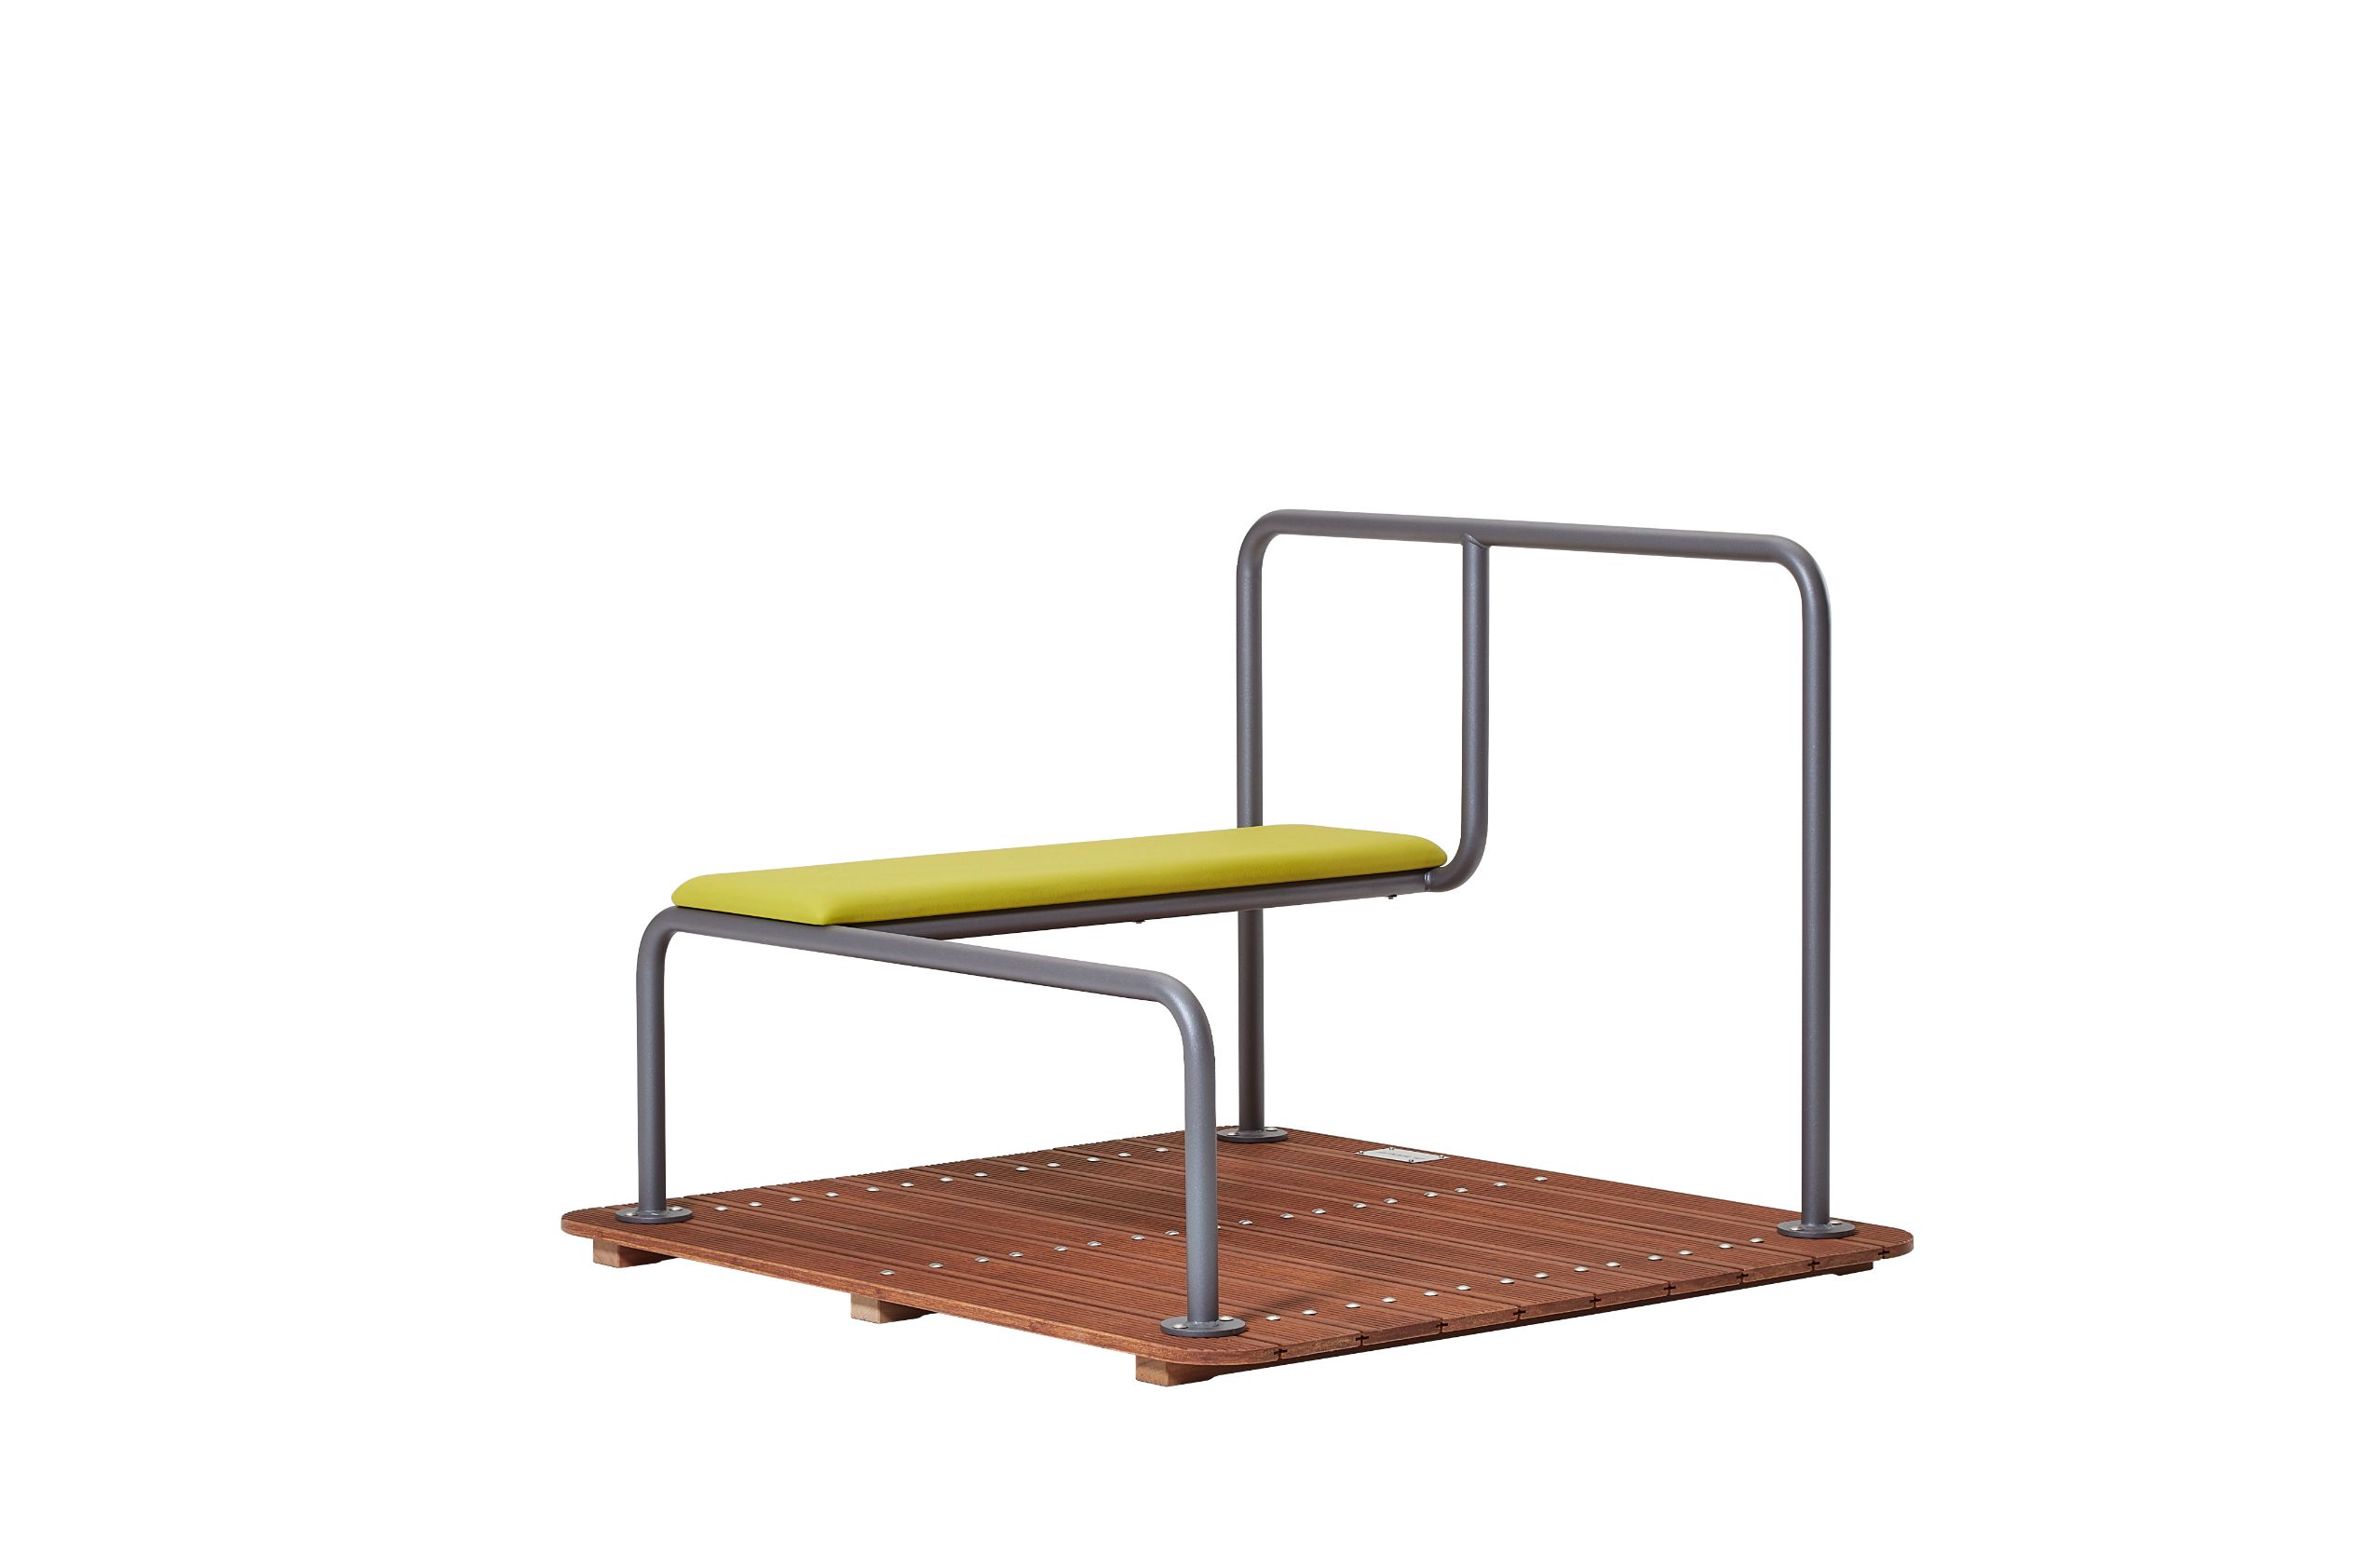 fitbench outdoor fitness dr. wolff (1)